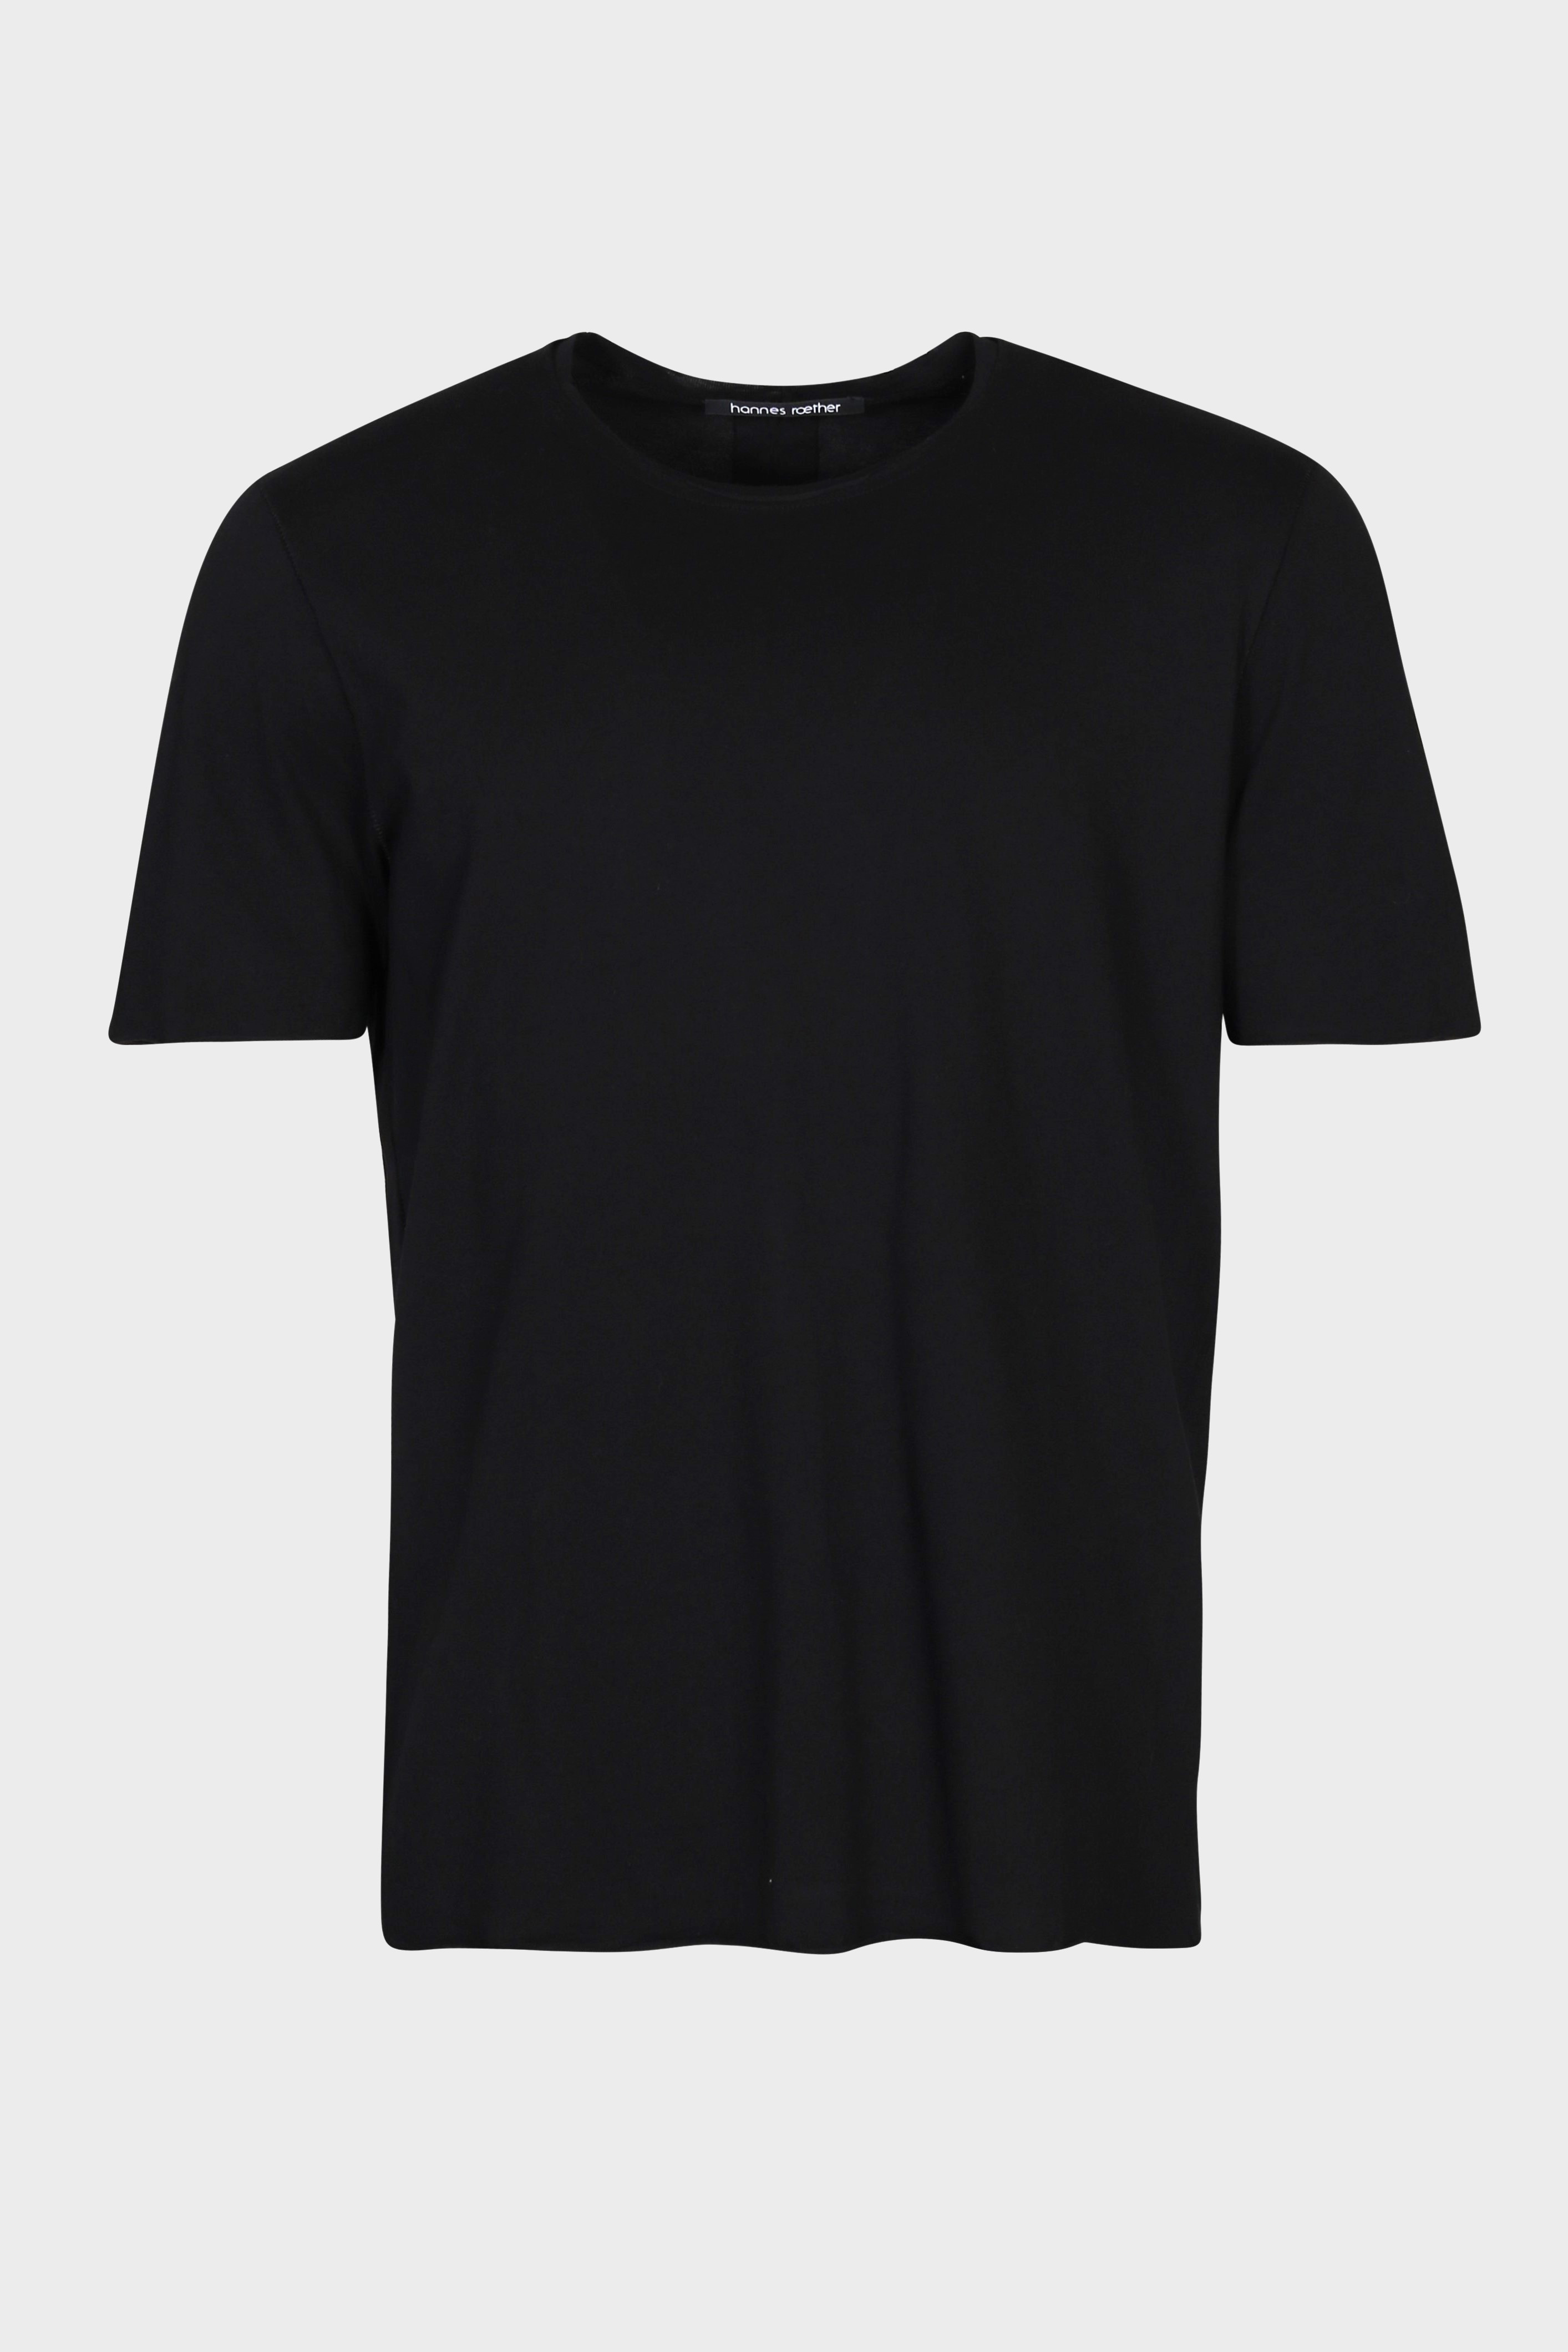 HANNES ROETHER T-Shirt in Black S